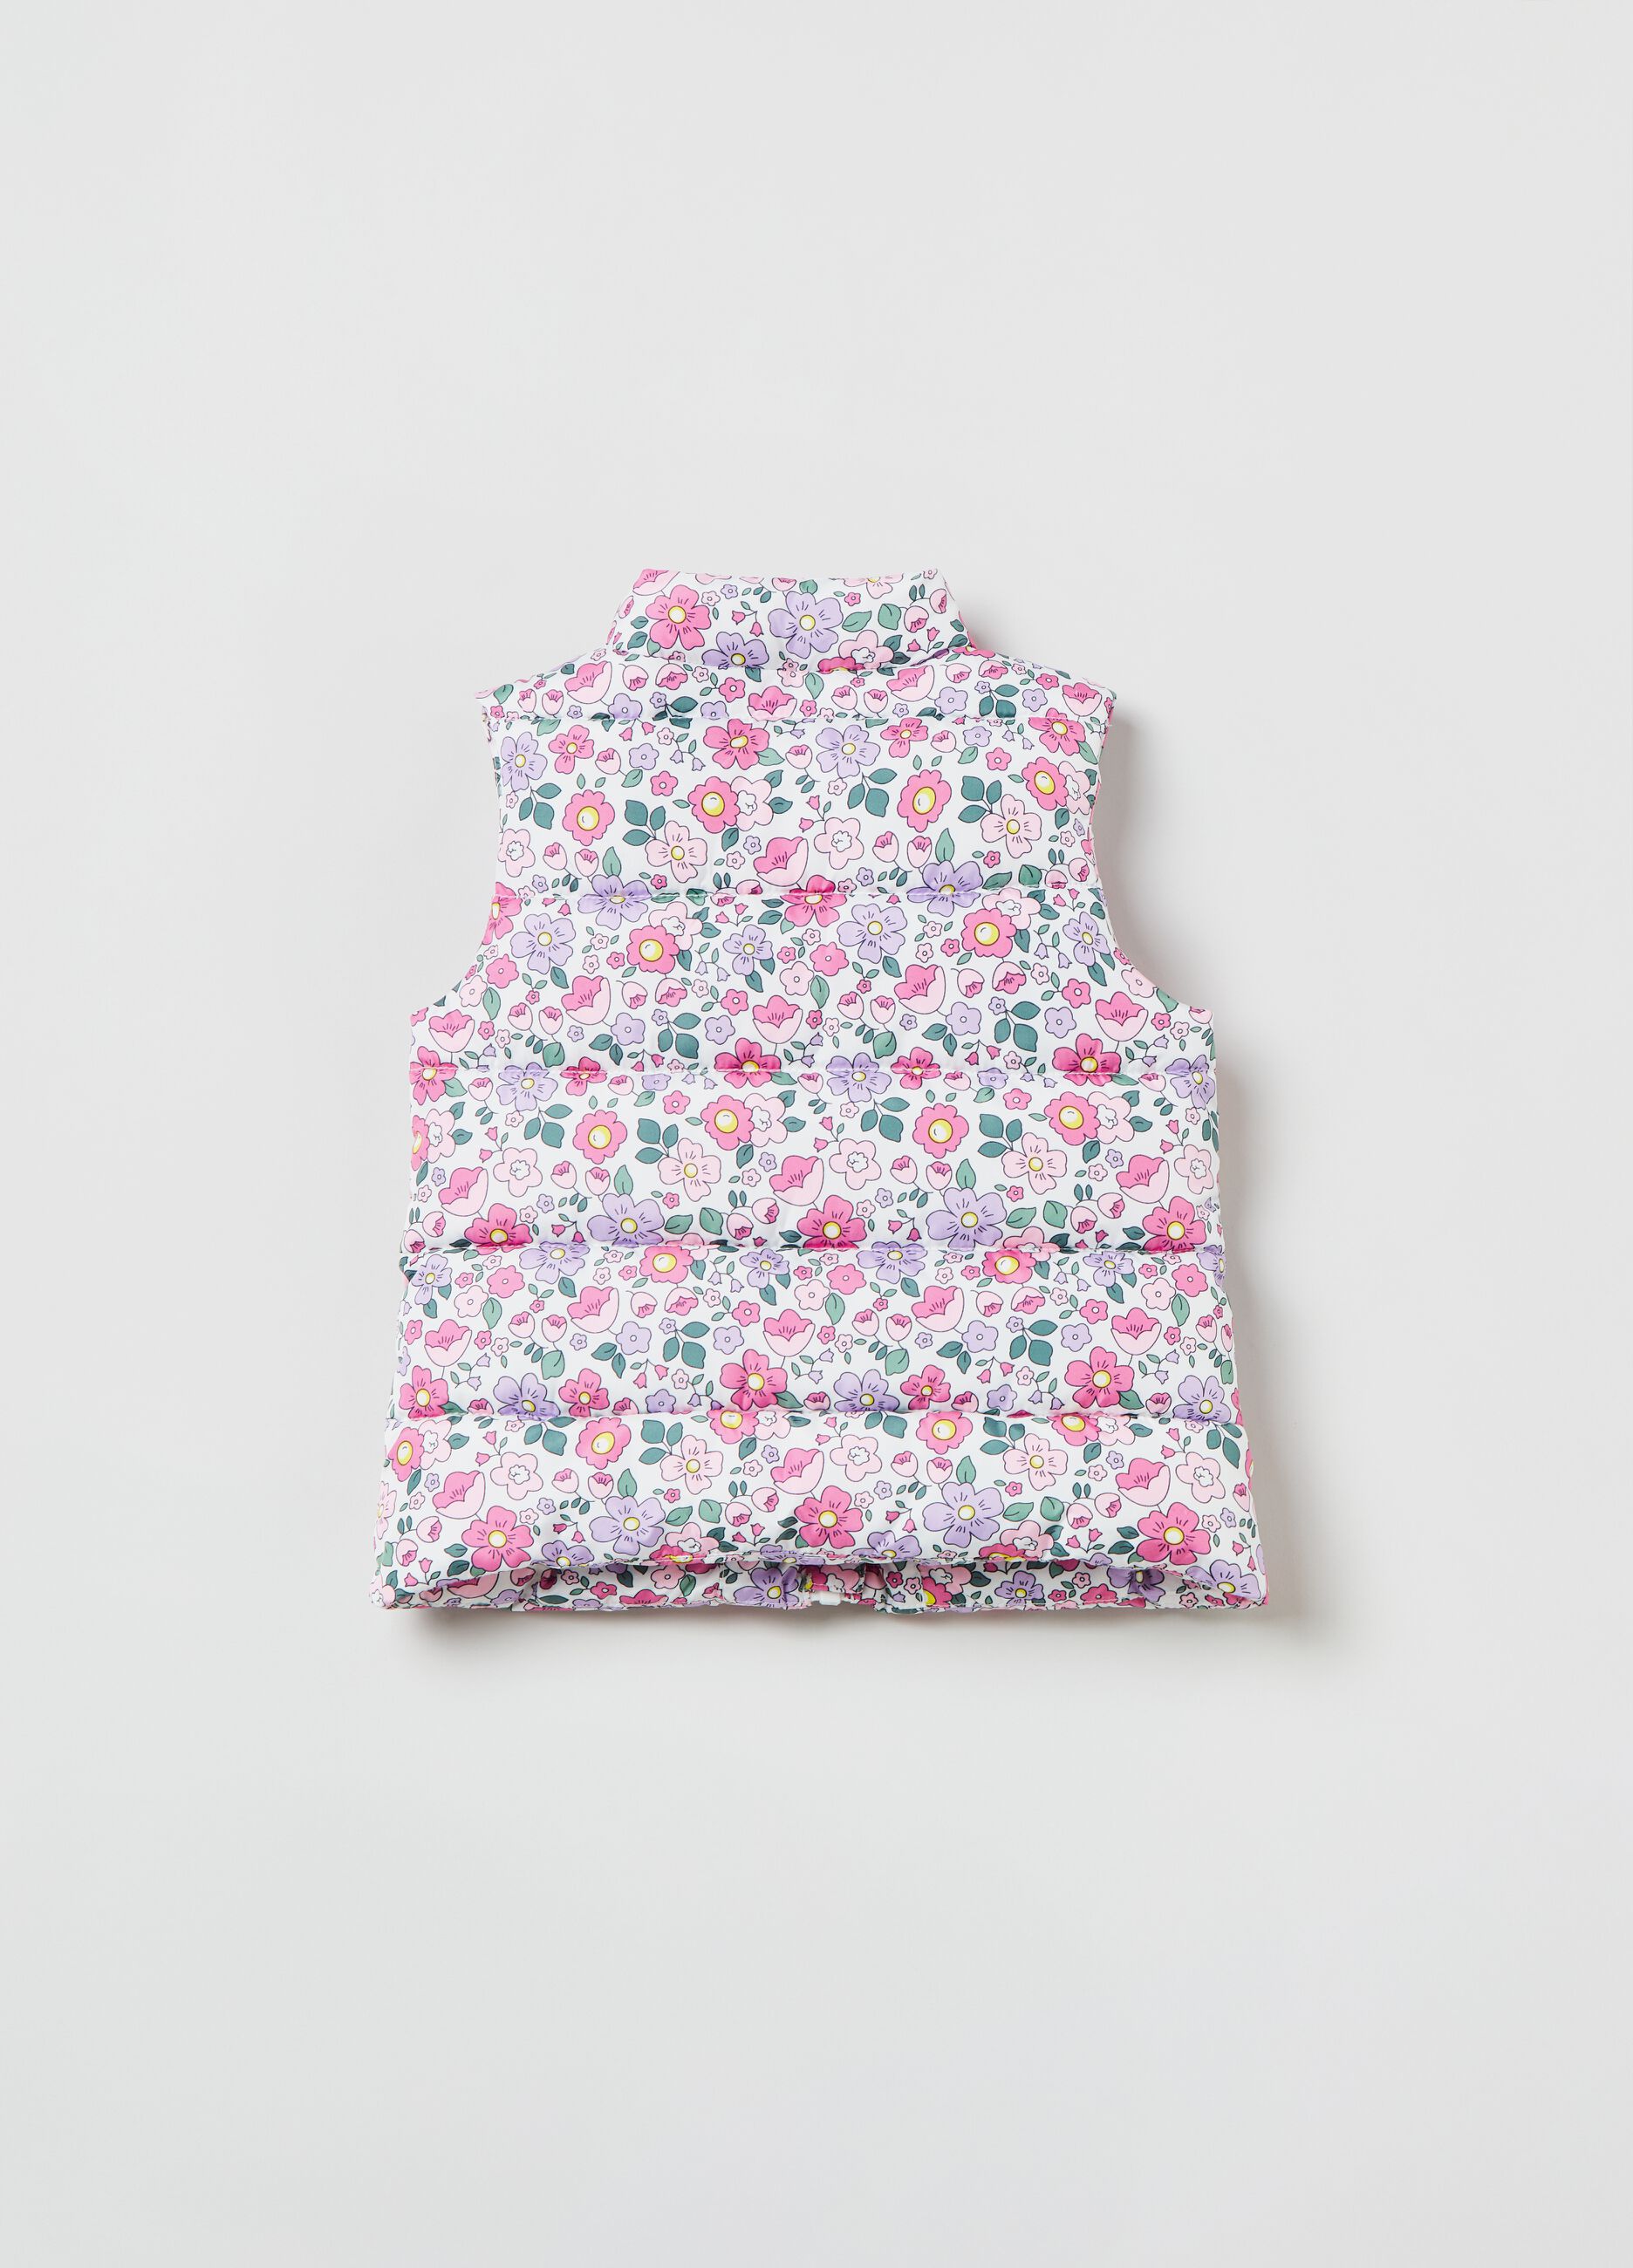 Full-zip gilet with floral print